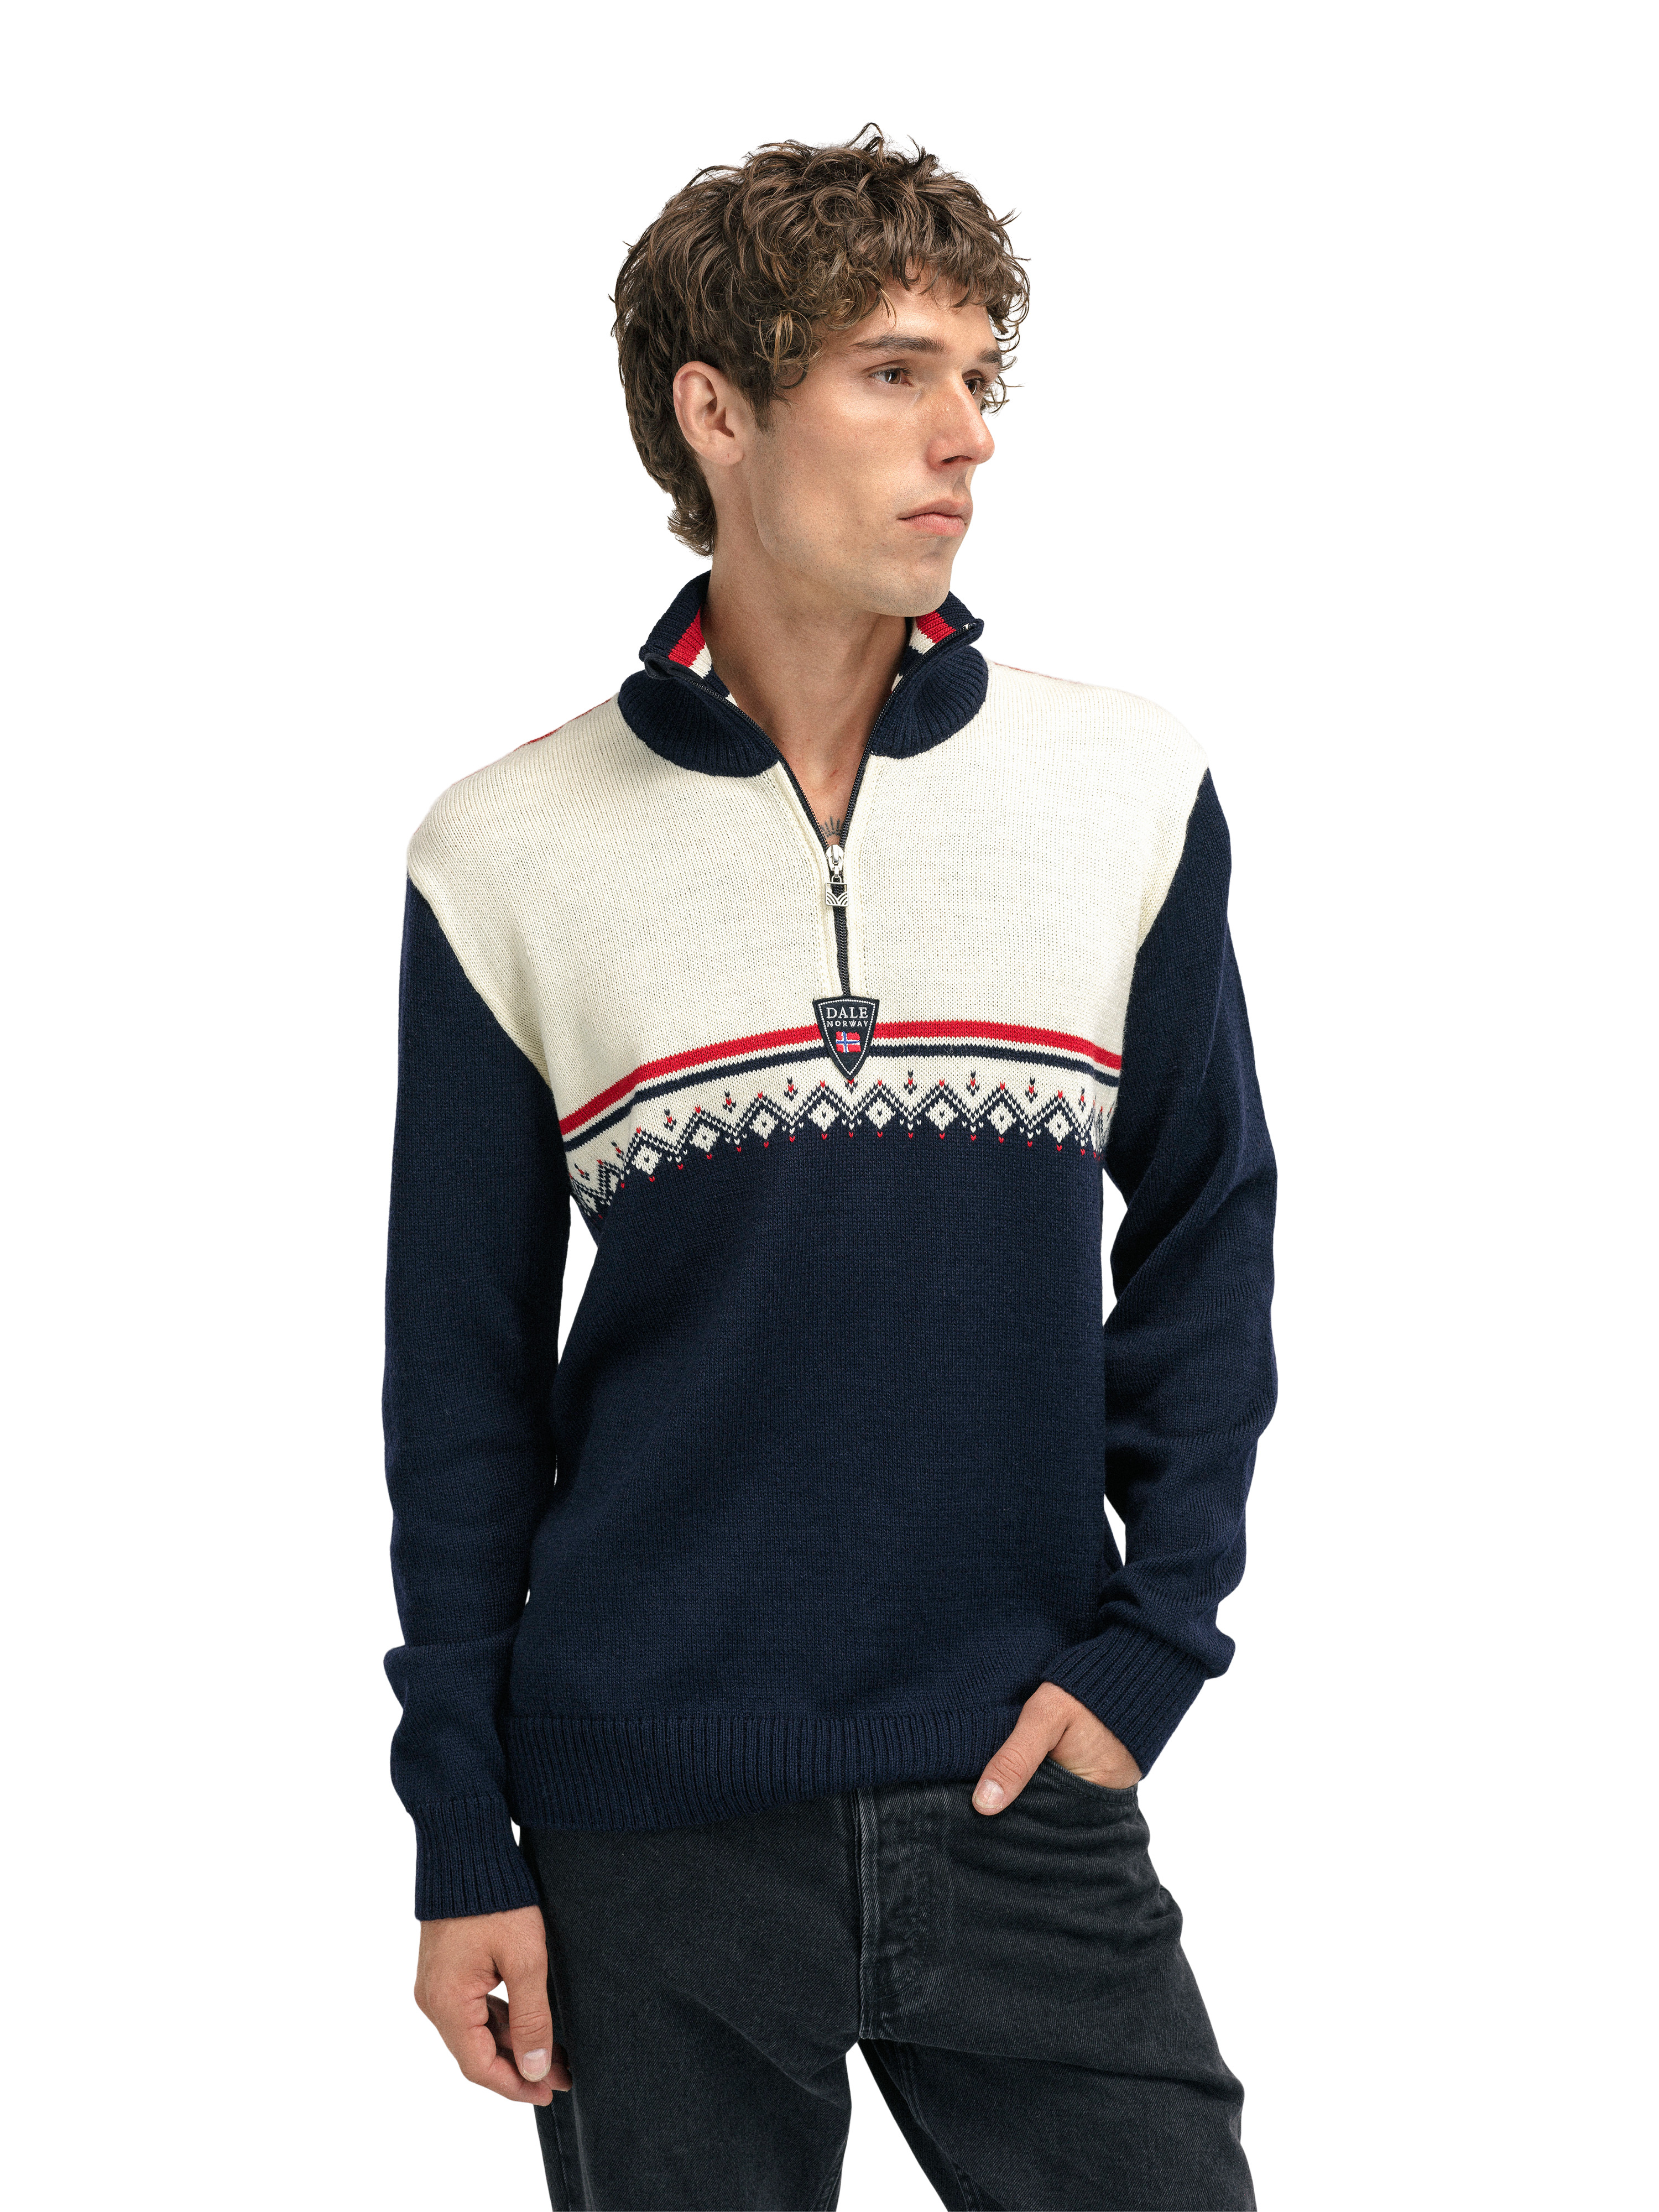 Lahti Sweater - Men - Navy/Offwhite - Dale of Norway - Dale of Norway